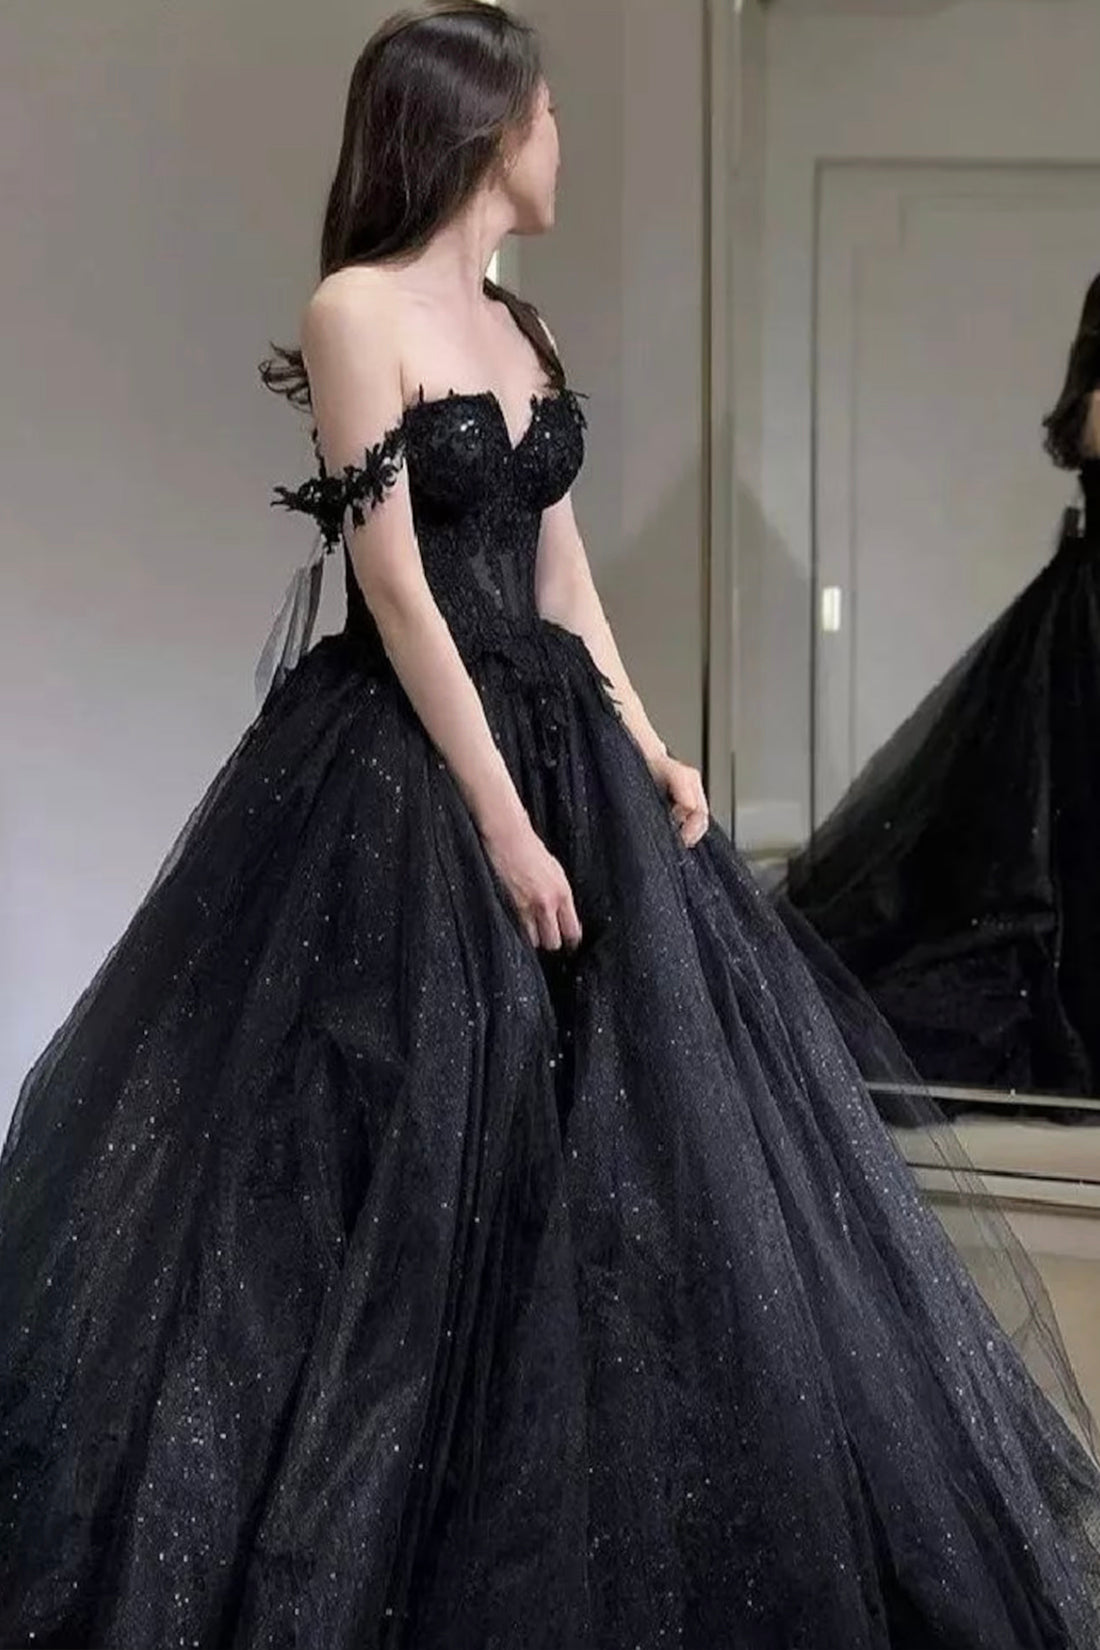 Black Off the Shoulder Tulle Lace Princess Dress, Shiny Tulle Floor Length Evening Party Dress